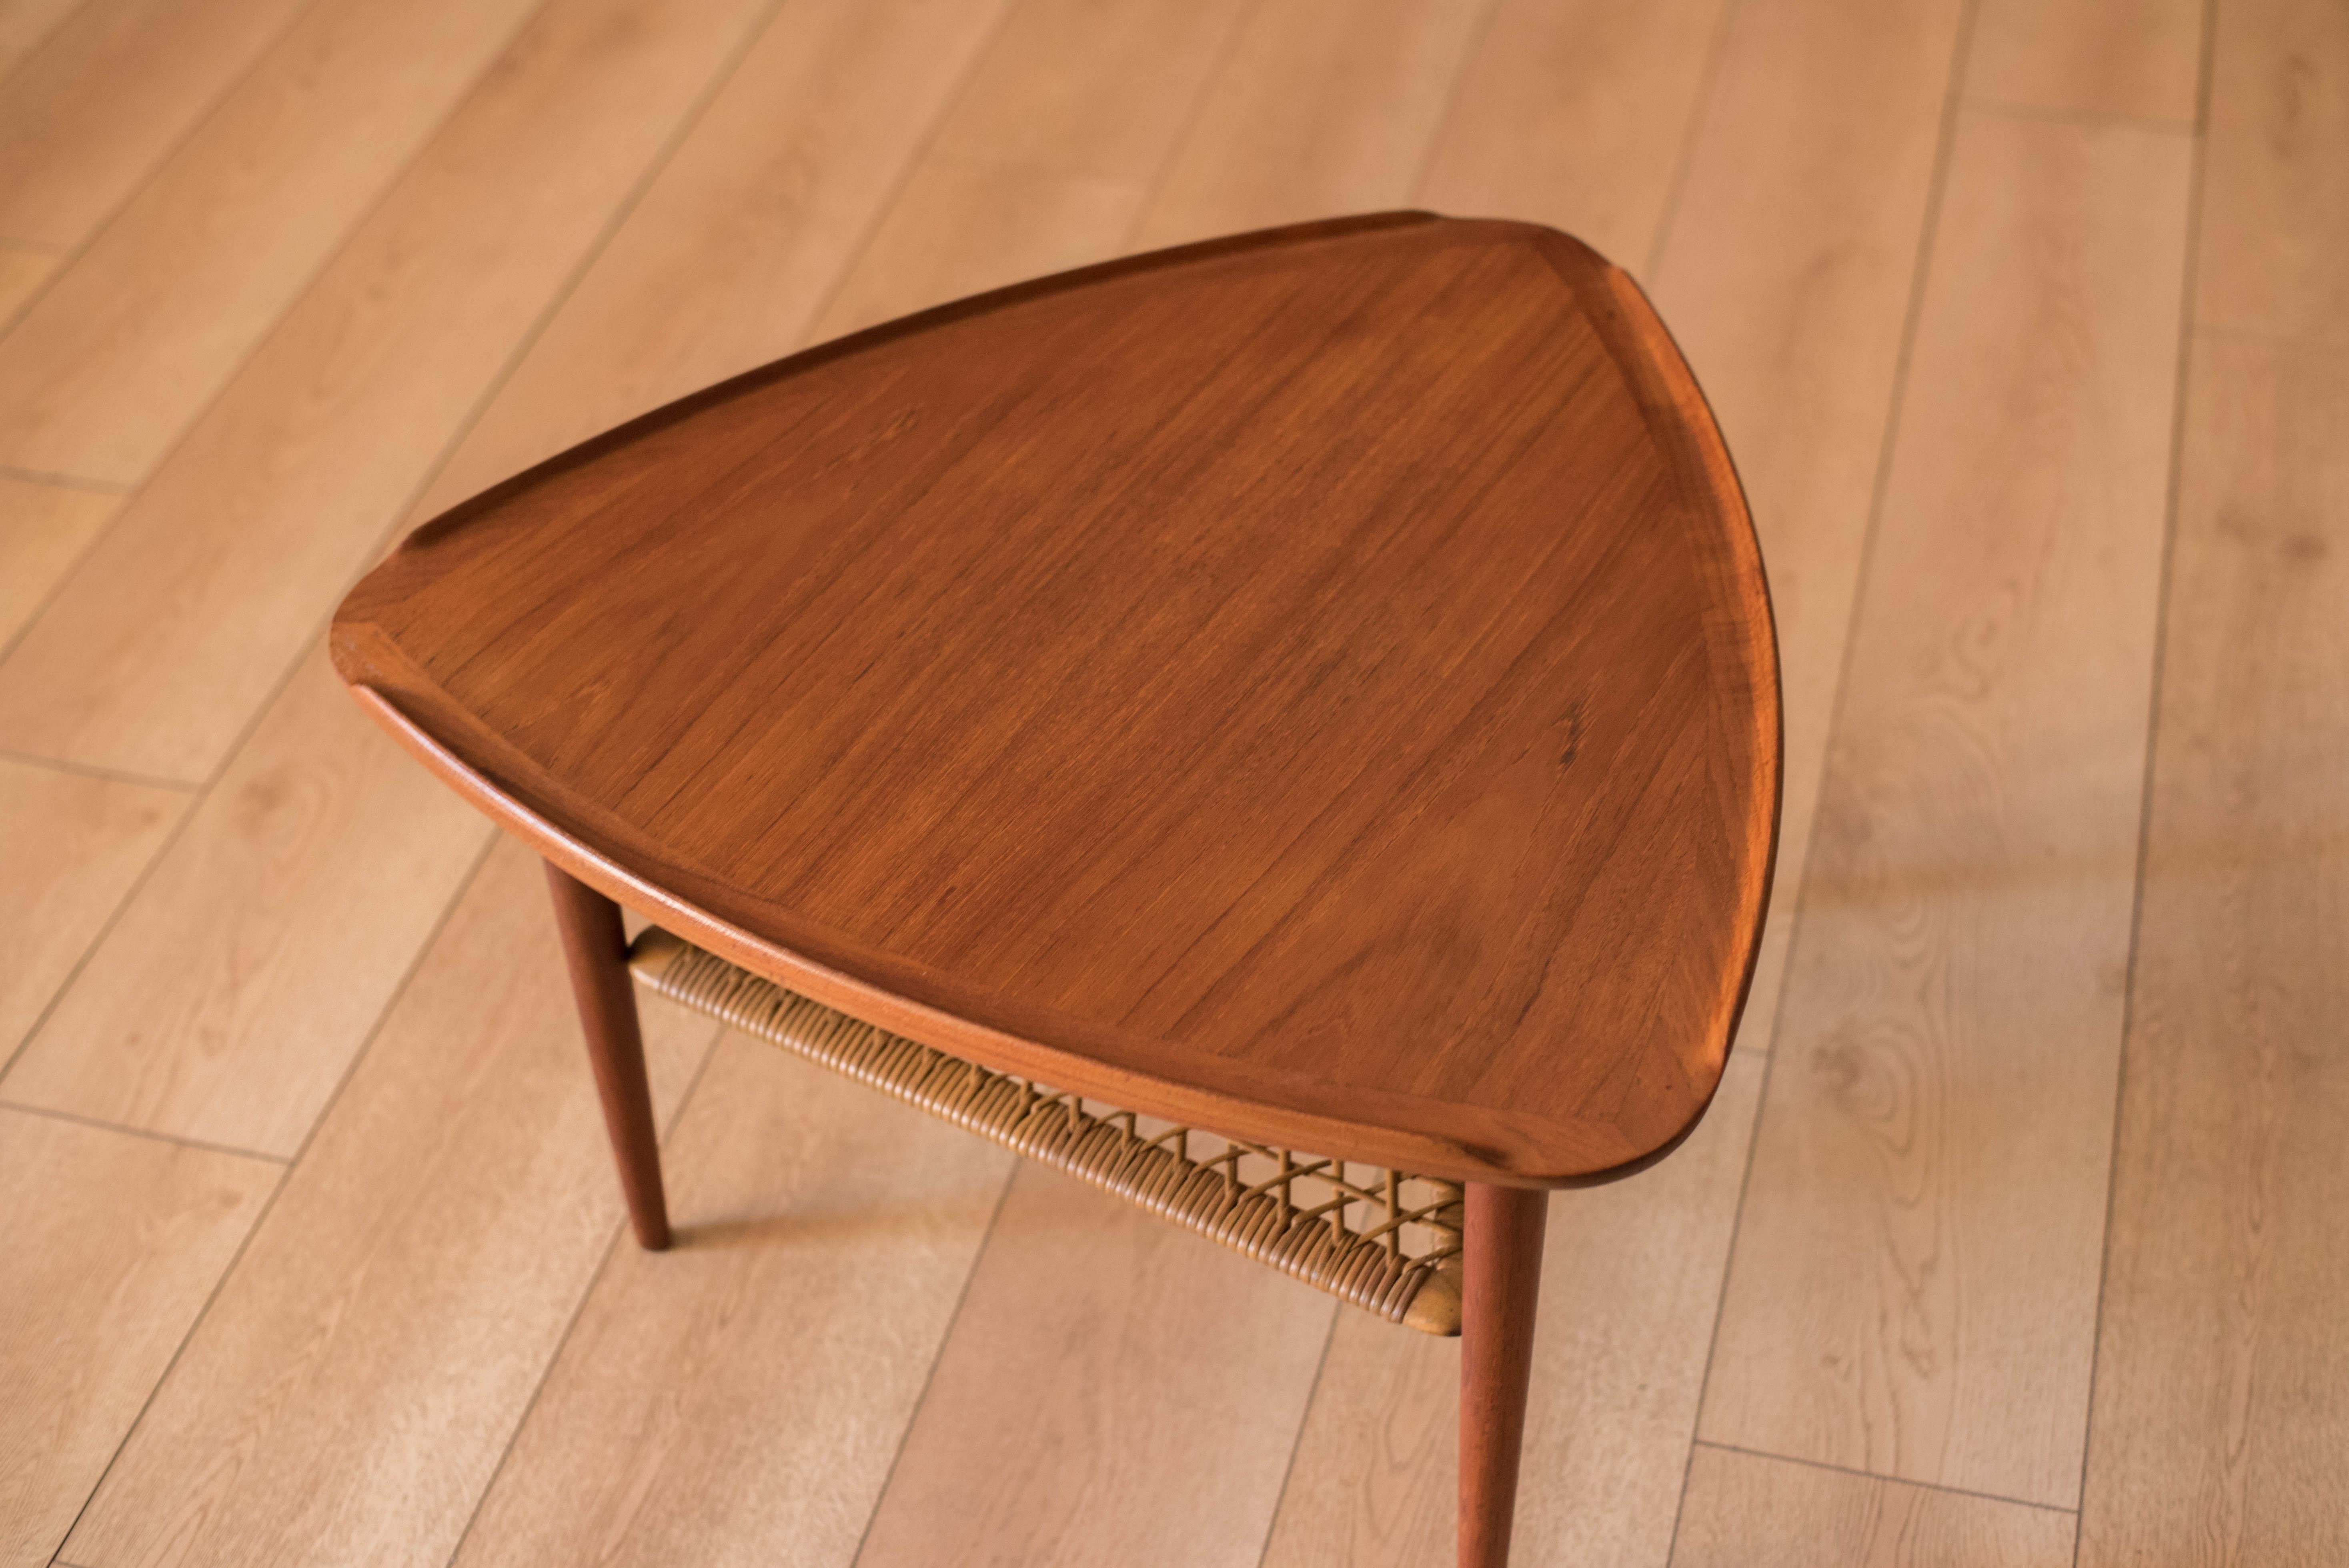 Scandinavian Modern Danish Modern Teak and Cane Selig Ocassional Triangle End Table by Poul Jensen For Sale